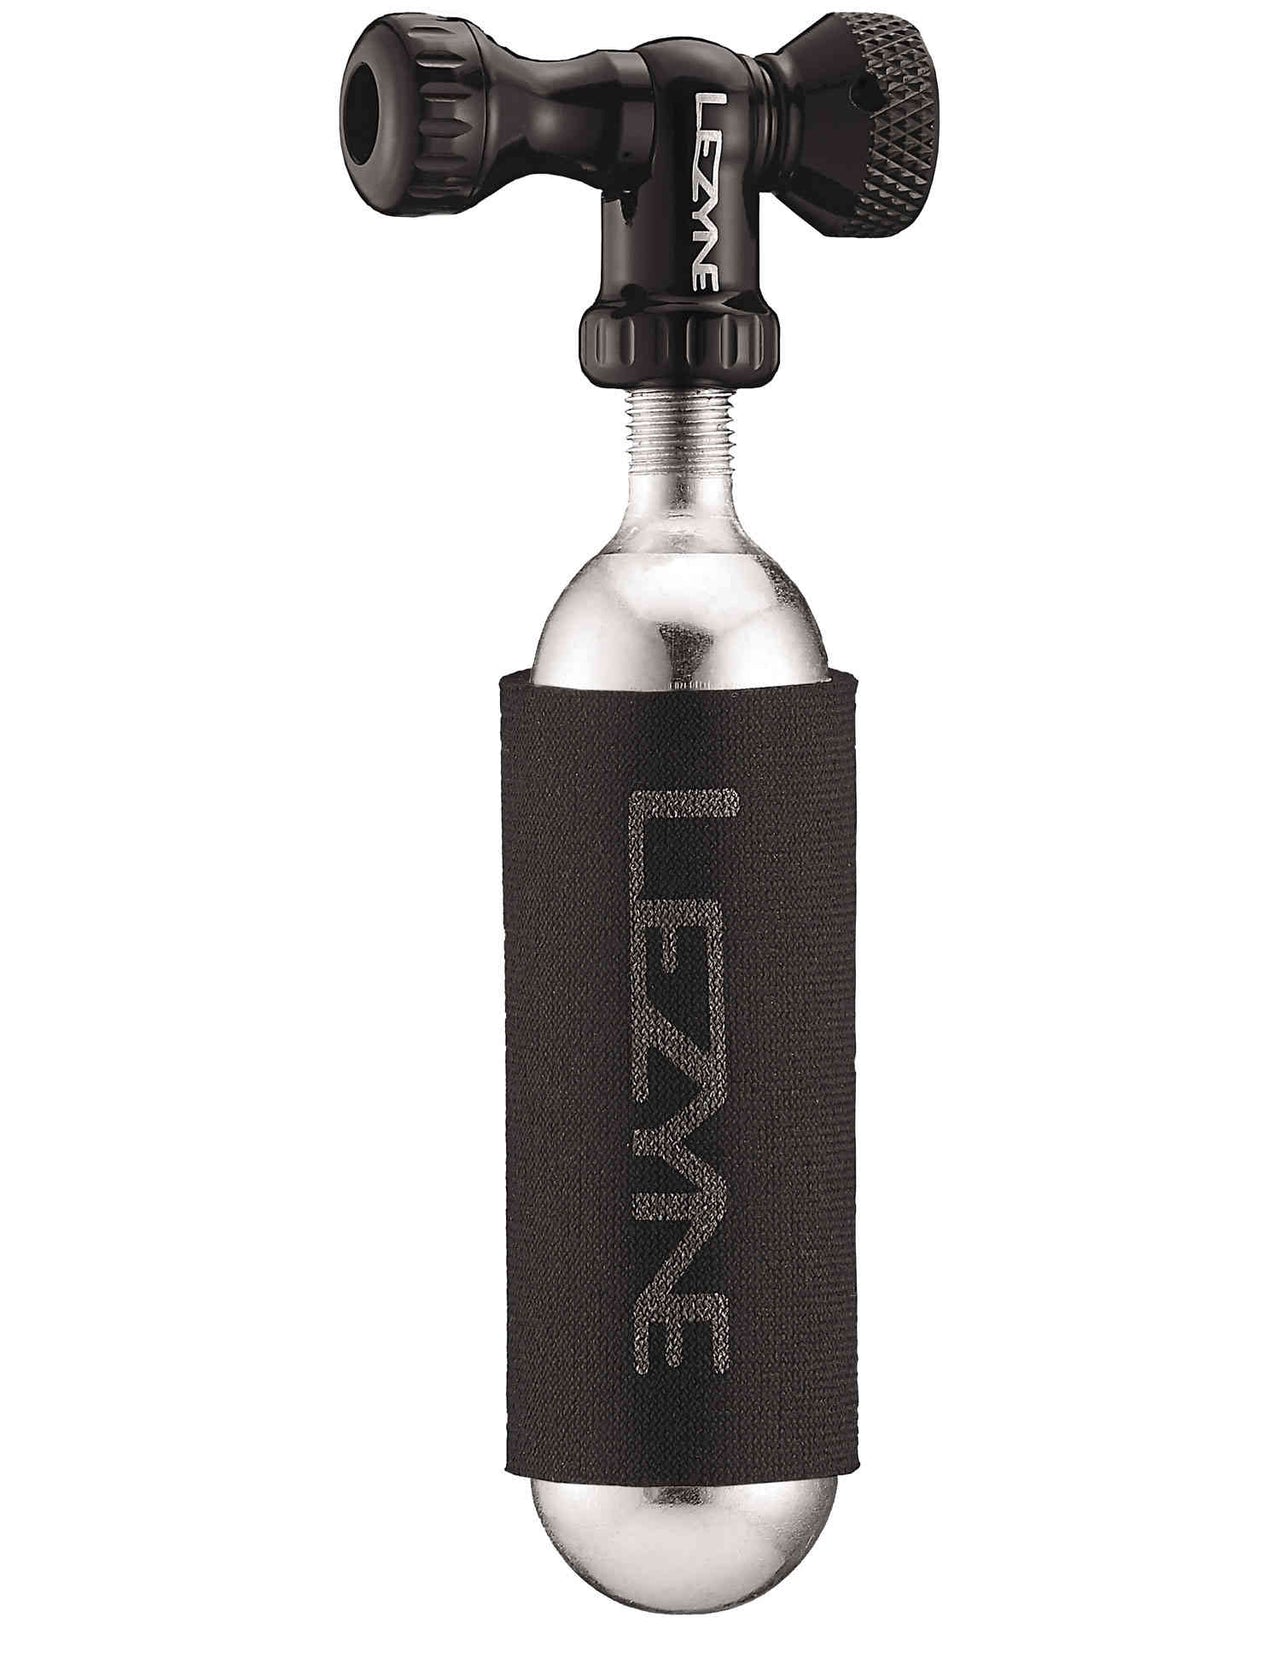 Lezyne Co2 Control Drive Black Includes 16gm Co2 Cylinder And Anti Freeze Jacket